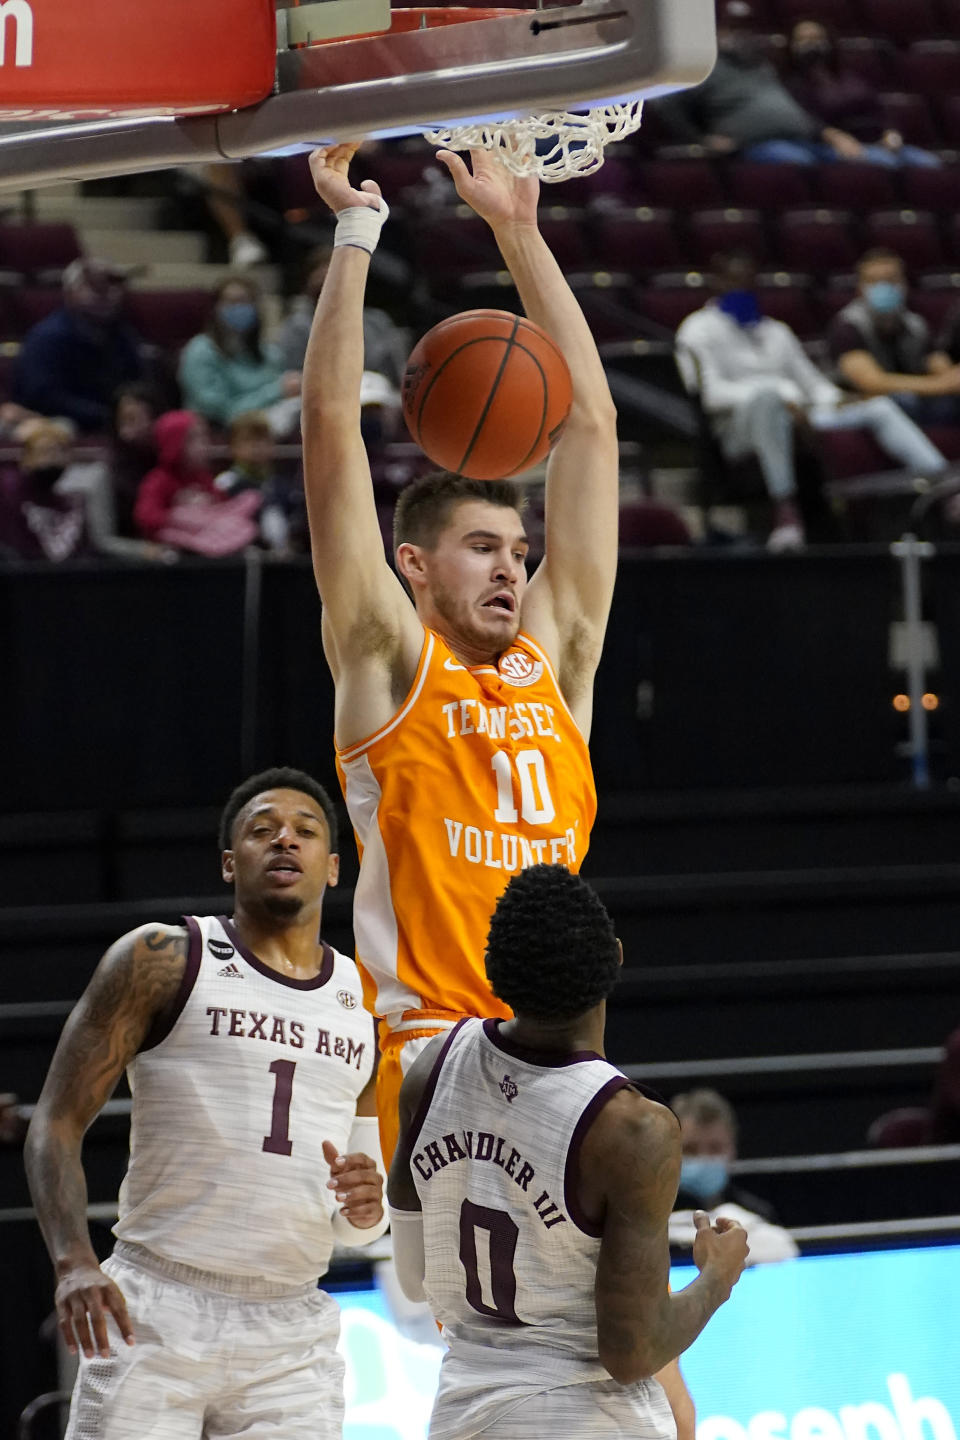 Tennessee forward John Fulkerson (10) dunks the ball over Texas A&M guard Jay Jay Chandler (0) during the first half of an NCAA college basketball game Saturday, Jan. 9, 2021, in College Station, Texas. (AP Photo/Sam Craft)